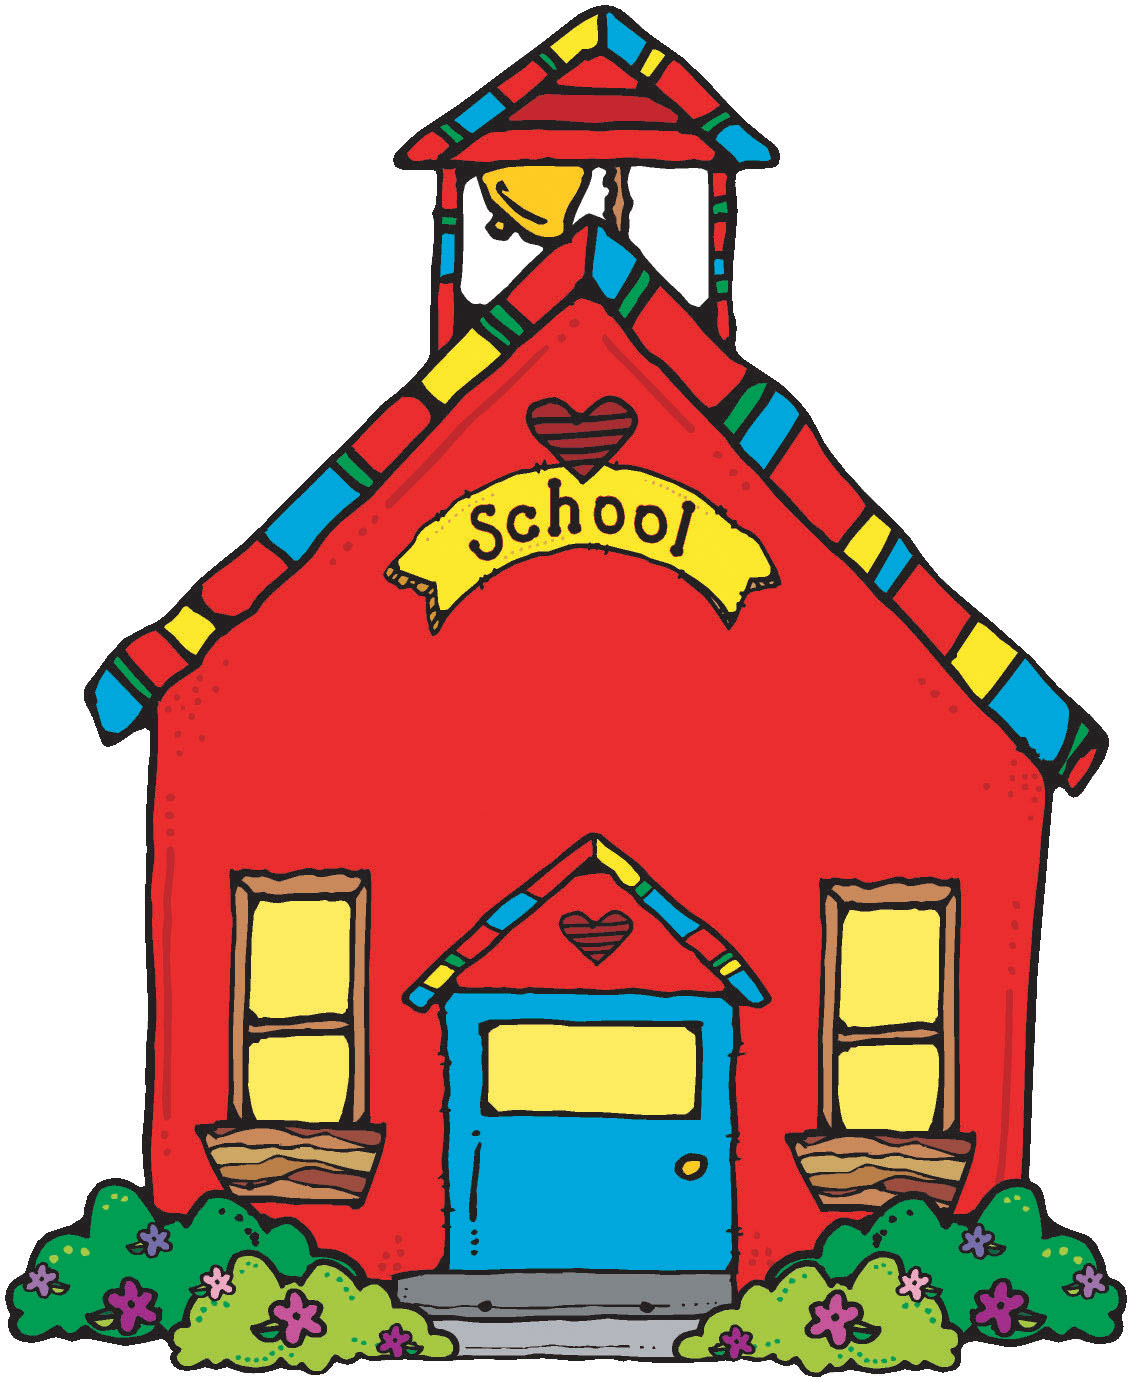 23 Schoolhouse Clip Art Free Cliparts That You Can Download To You